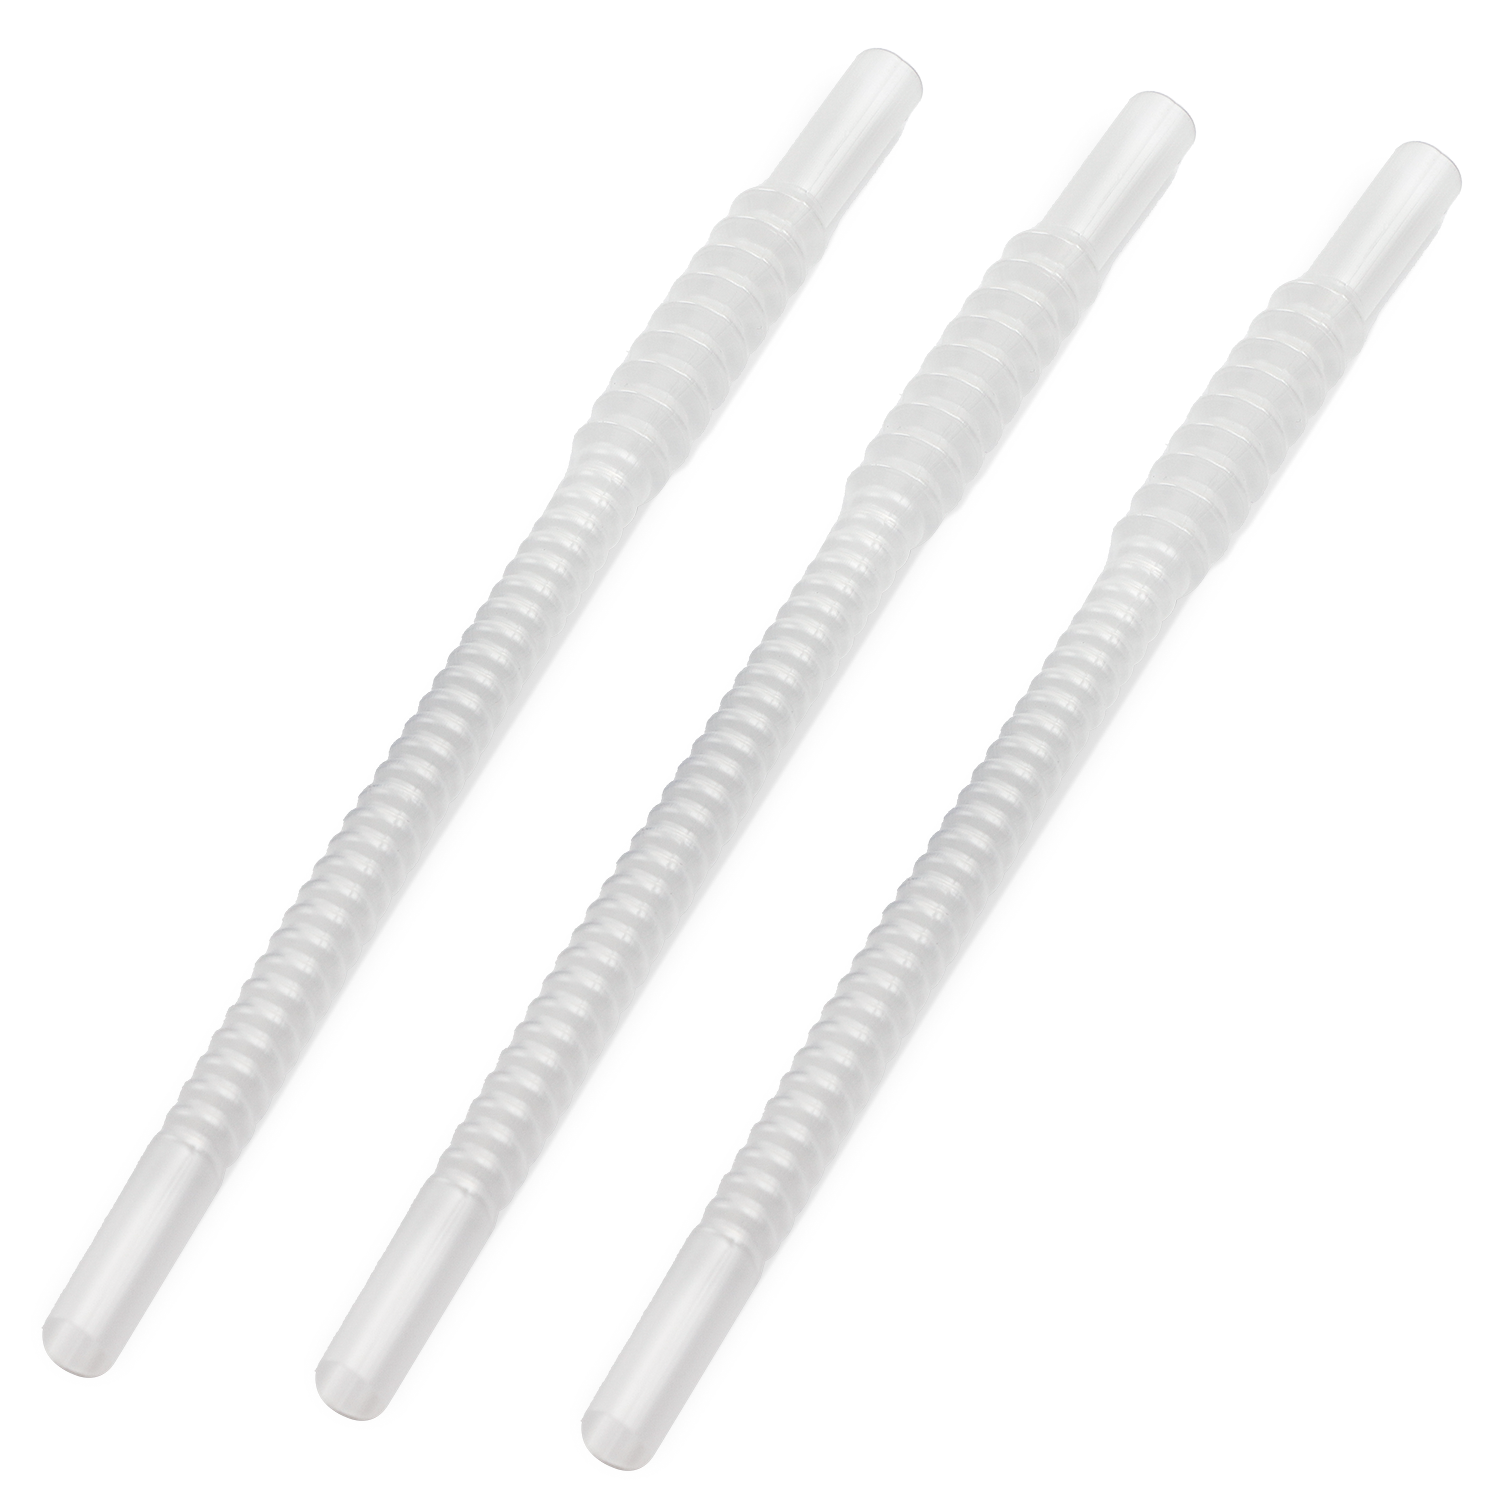 11 Inch Long Flexible Pink Reusable Straws with White Straw Caps